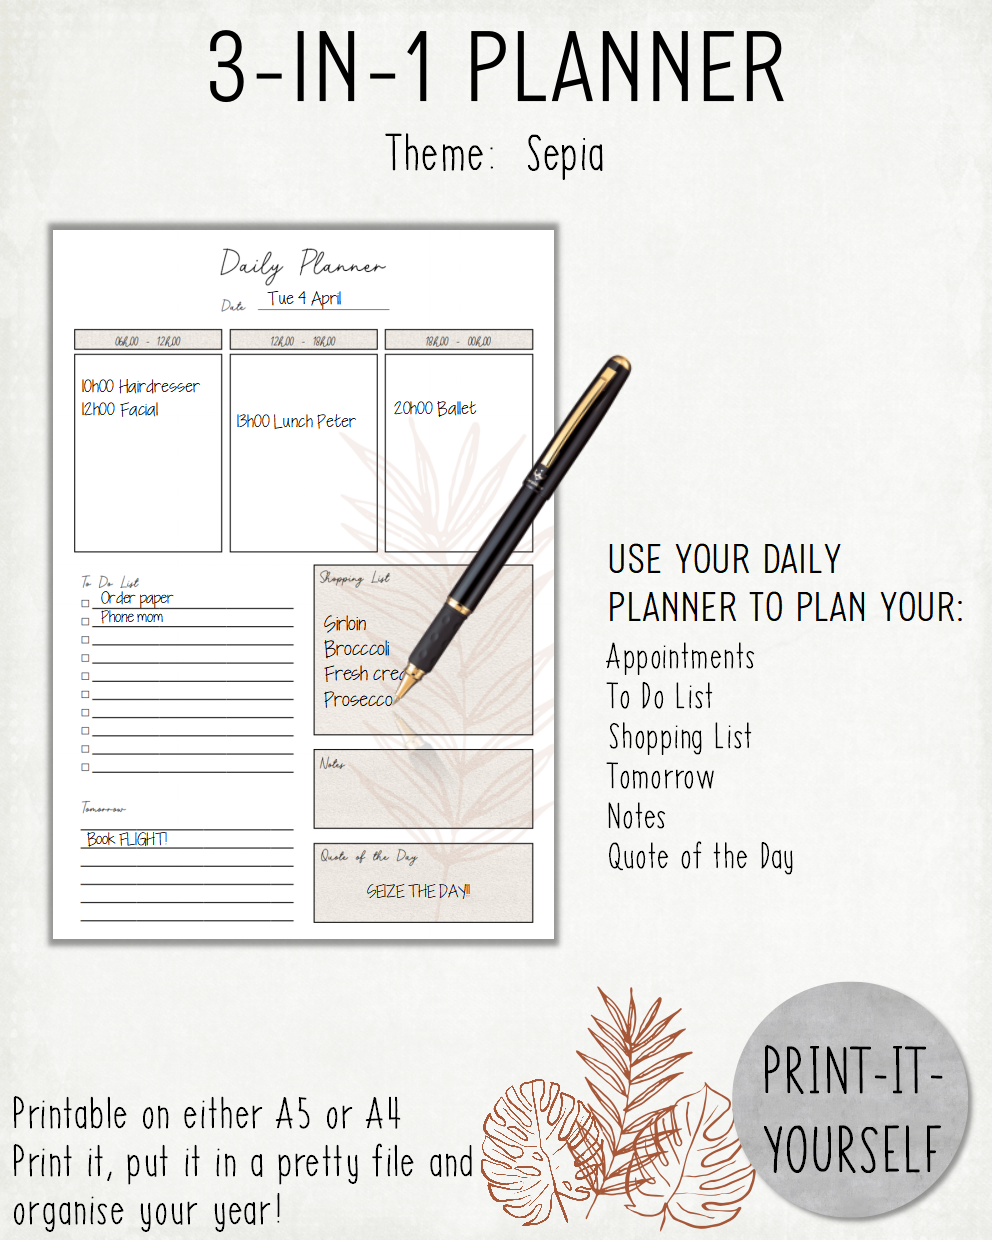 READY TO PRINT:  3-in-1 Planner - Sepia